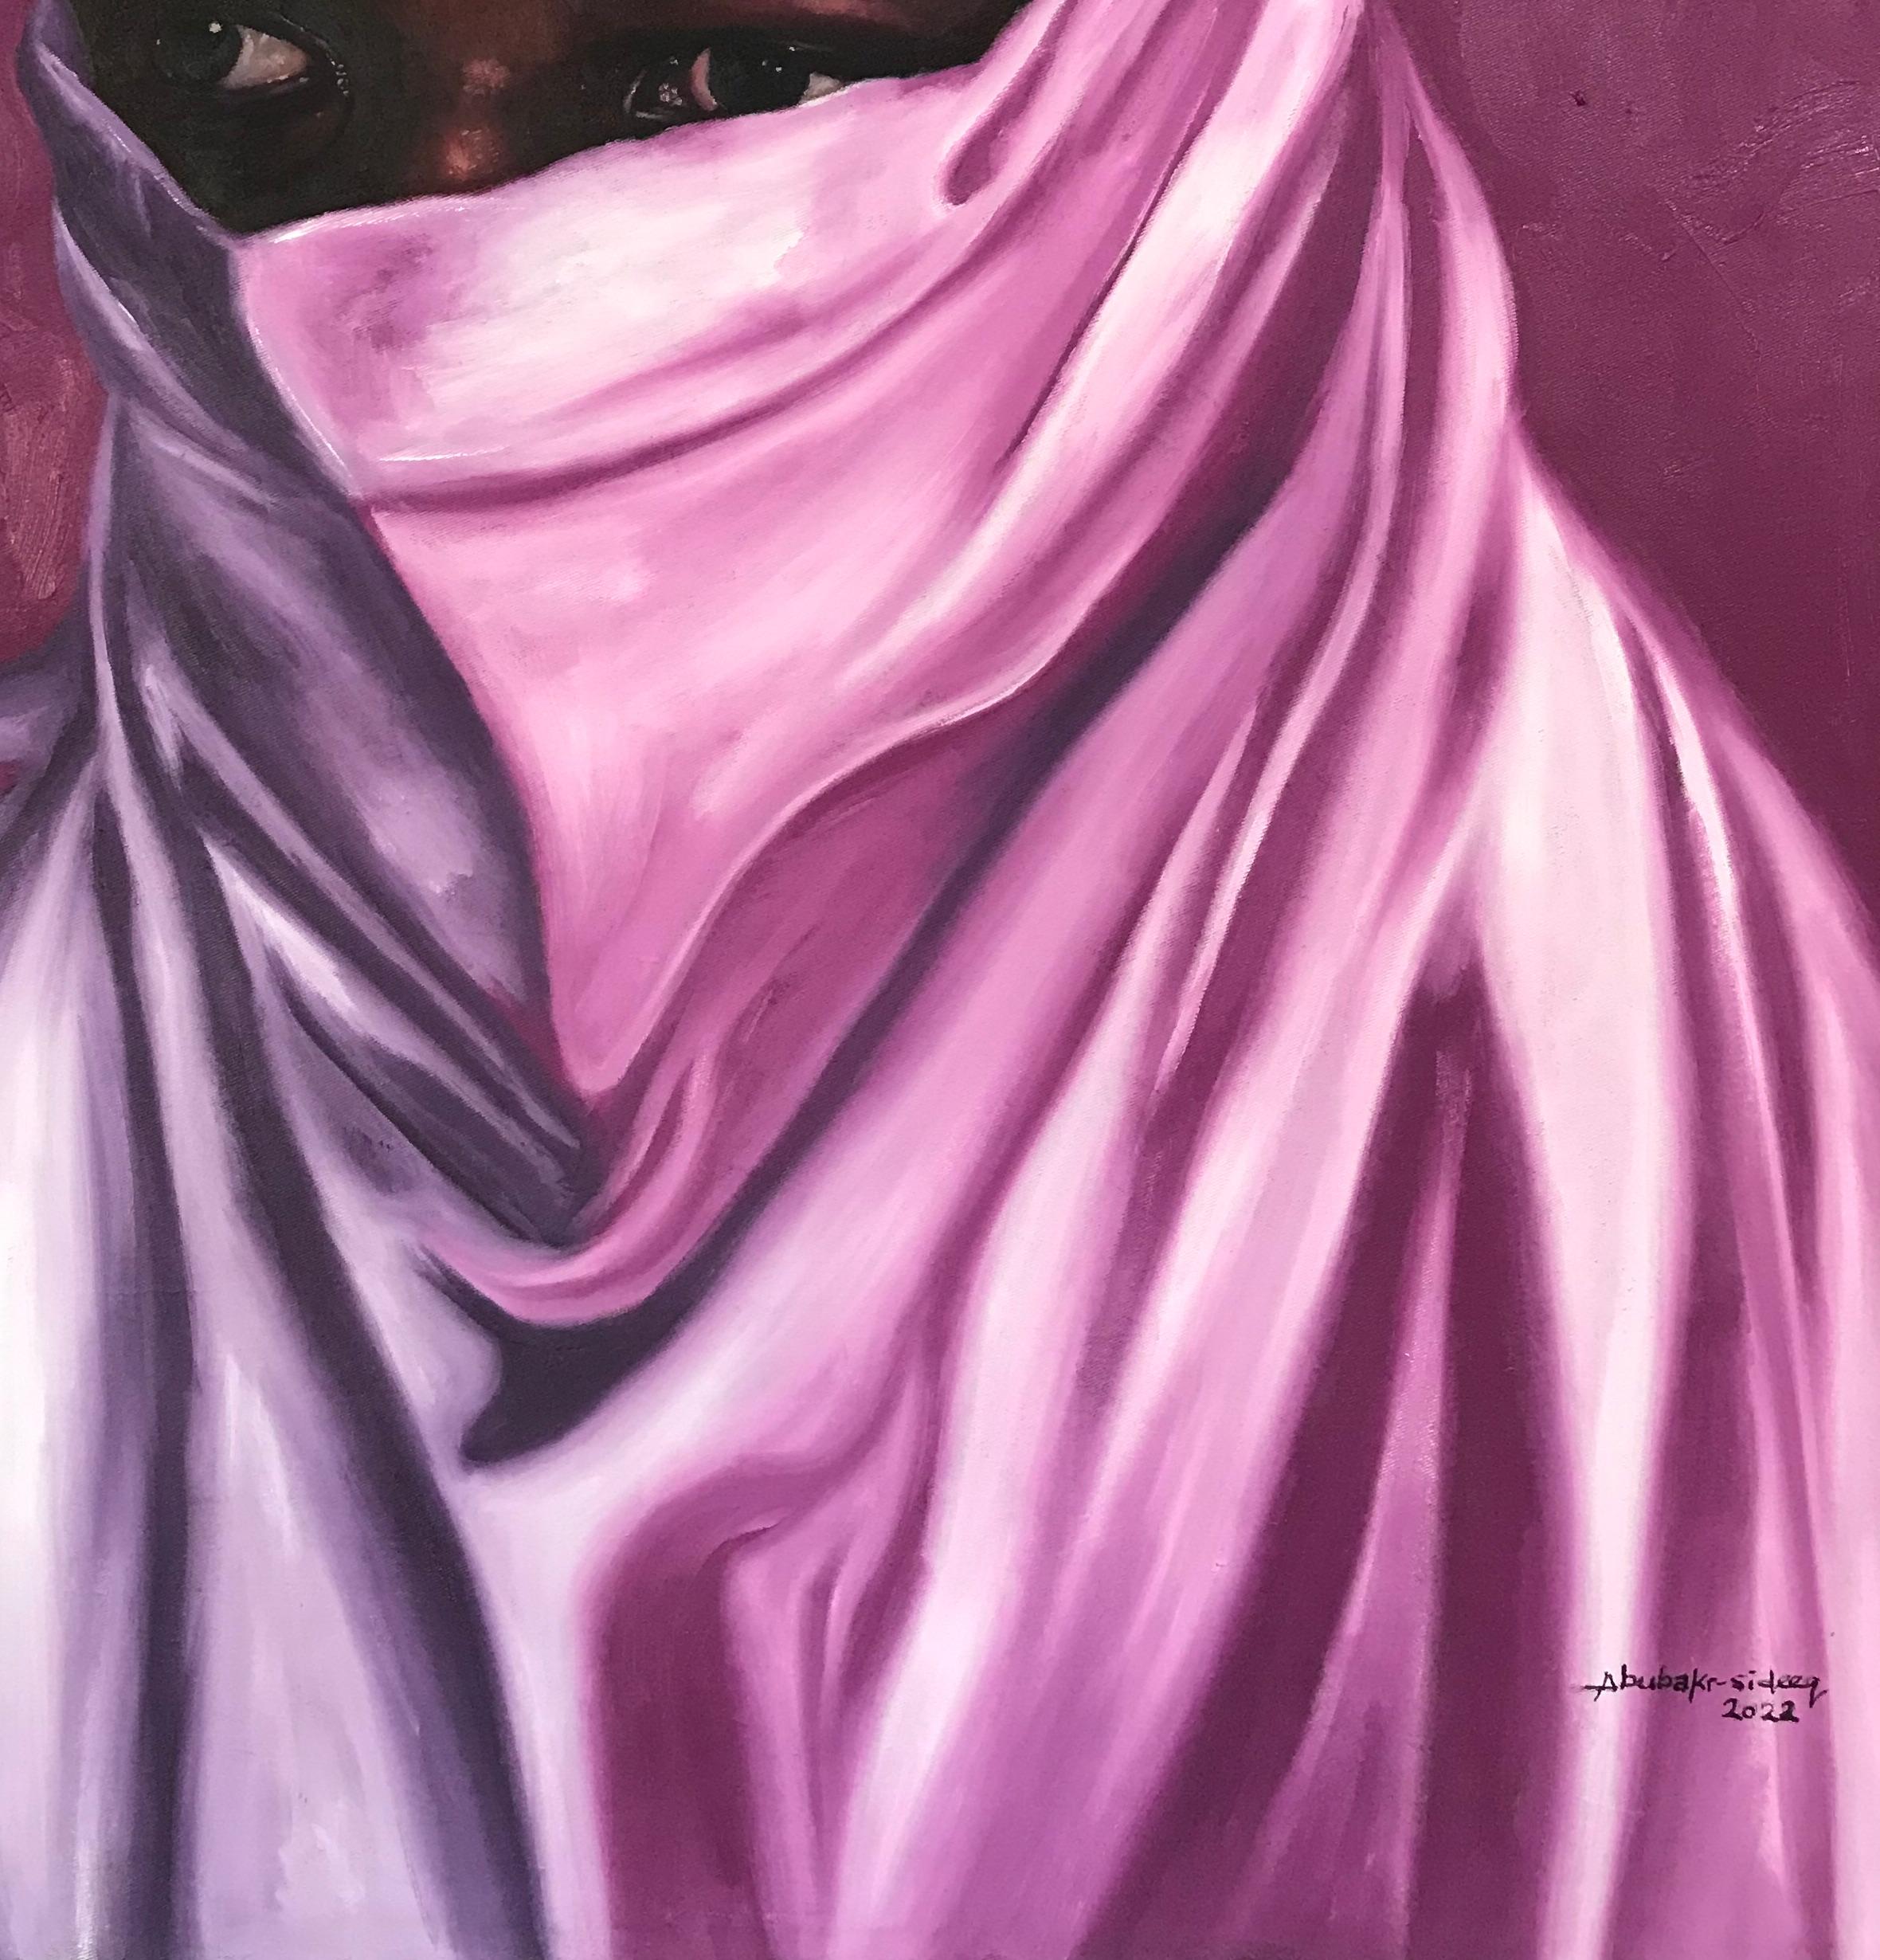 The painting depicts a young boy with a purple cloth wrapped around his face. The background of the painting is also a deep shade of purple, adding to the overall mood and tone of the piece. The boy's face is partially obscured by the cloth, giving